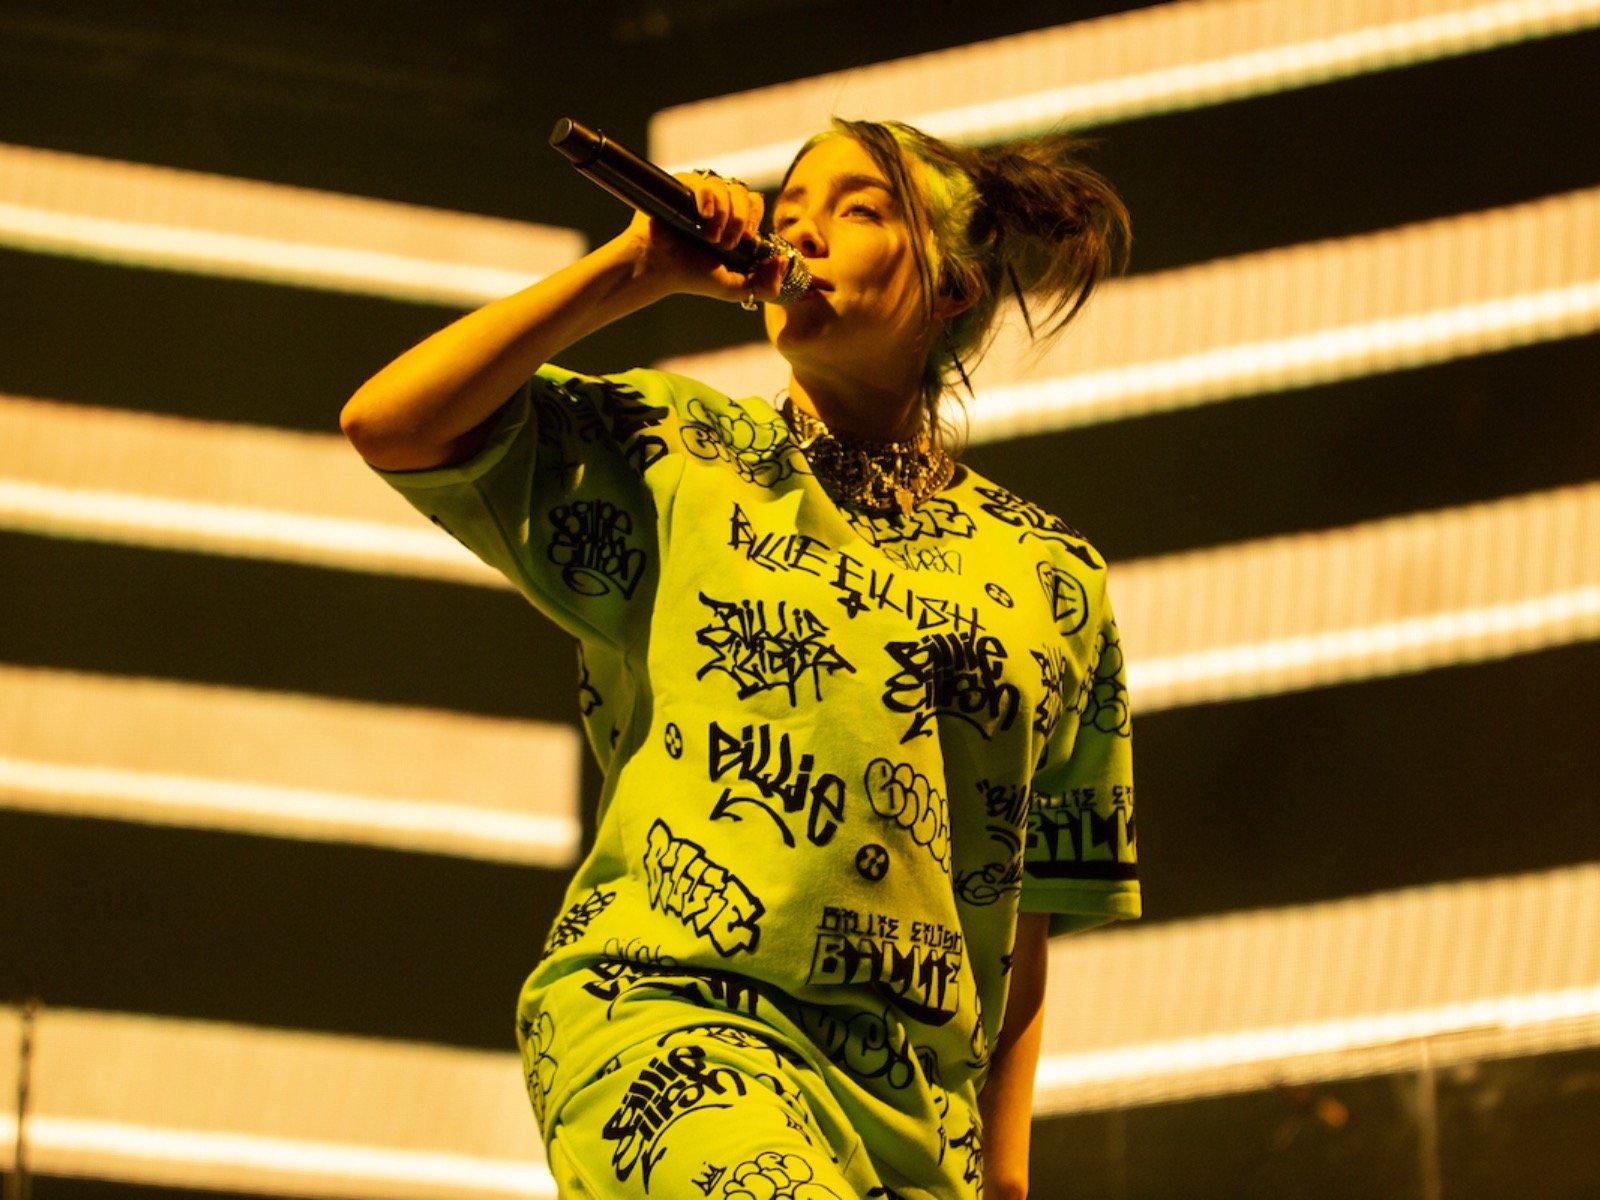 Sickness couldn't stop rising star Billie Eilish from stunning at